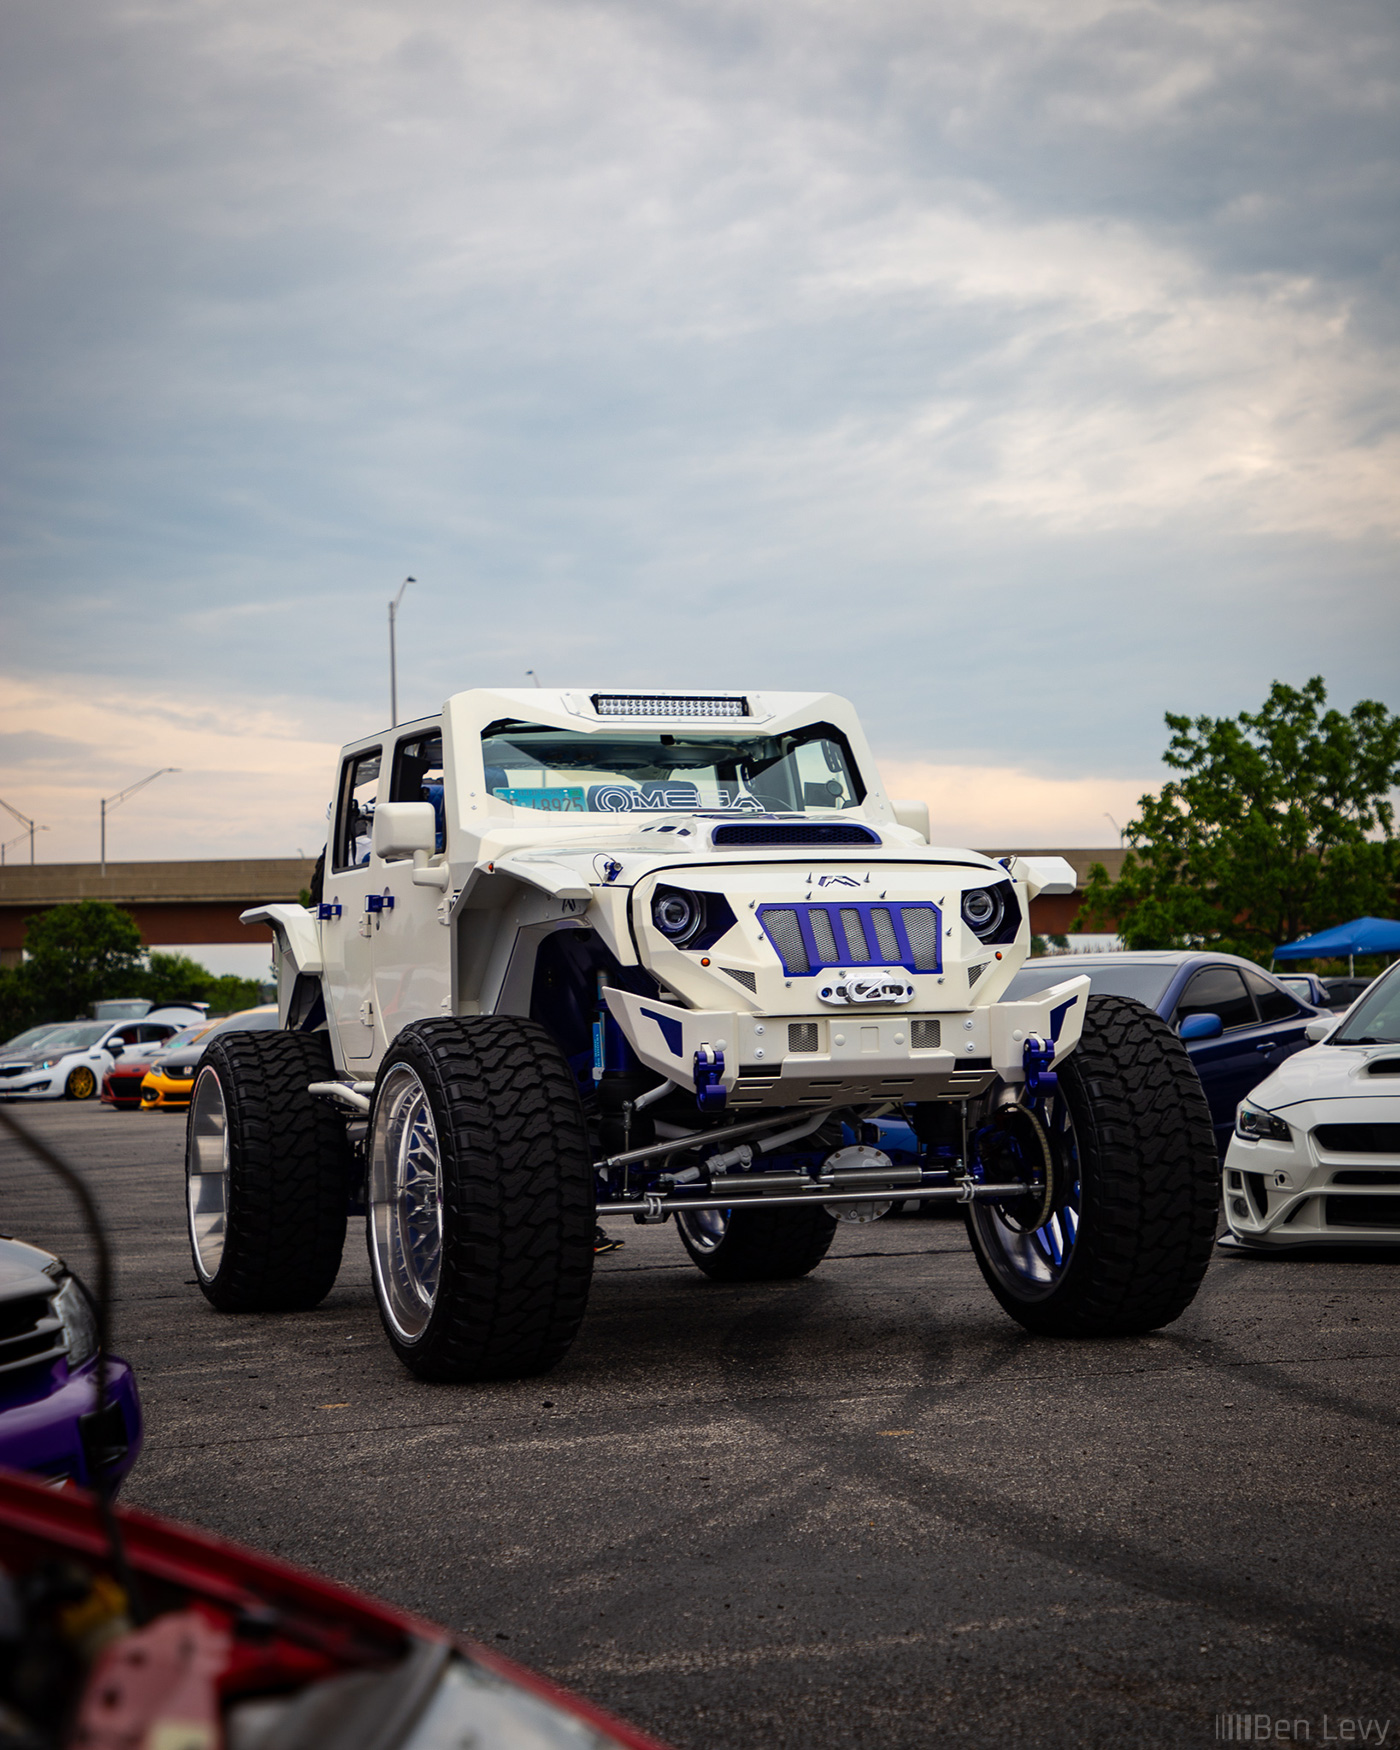 Lifted, White Jeep Wrangler at Cars and Culture Car Show